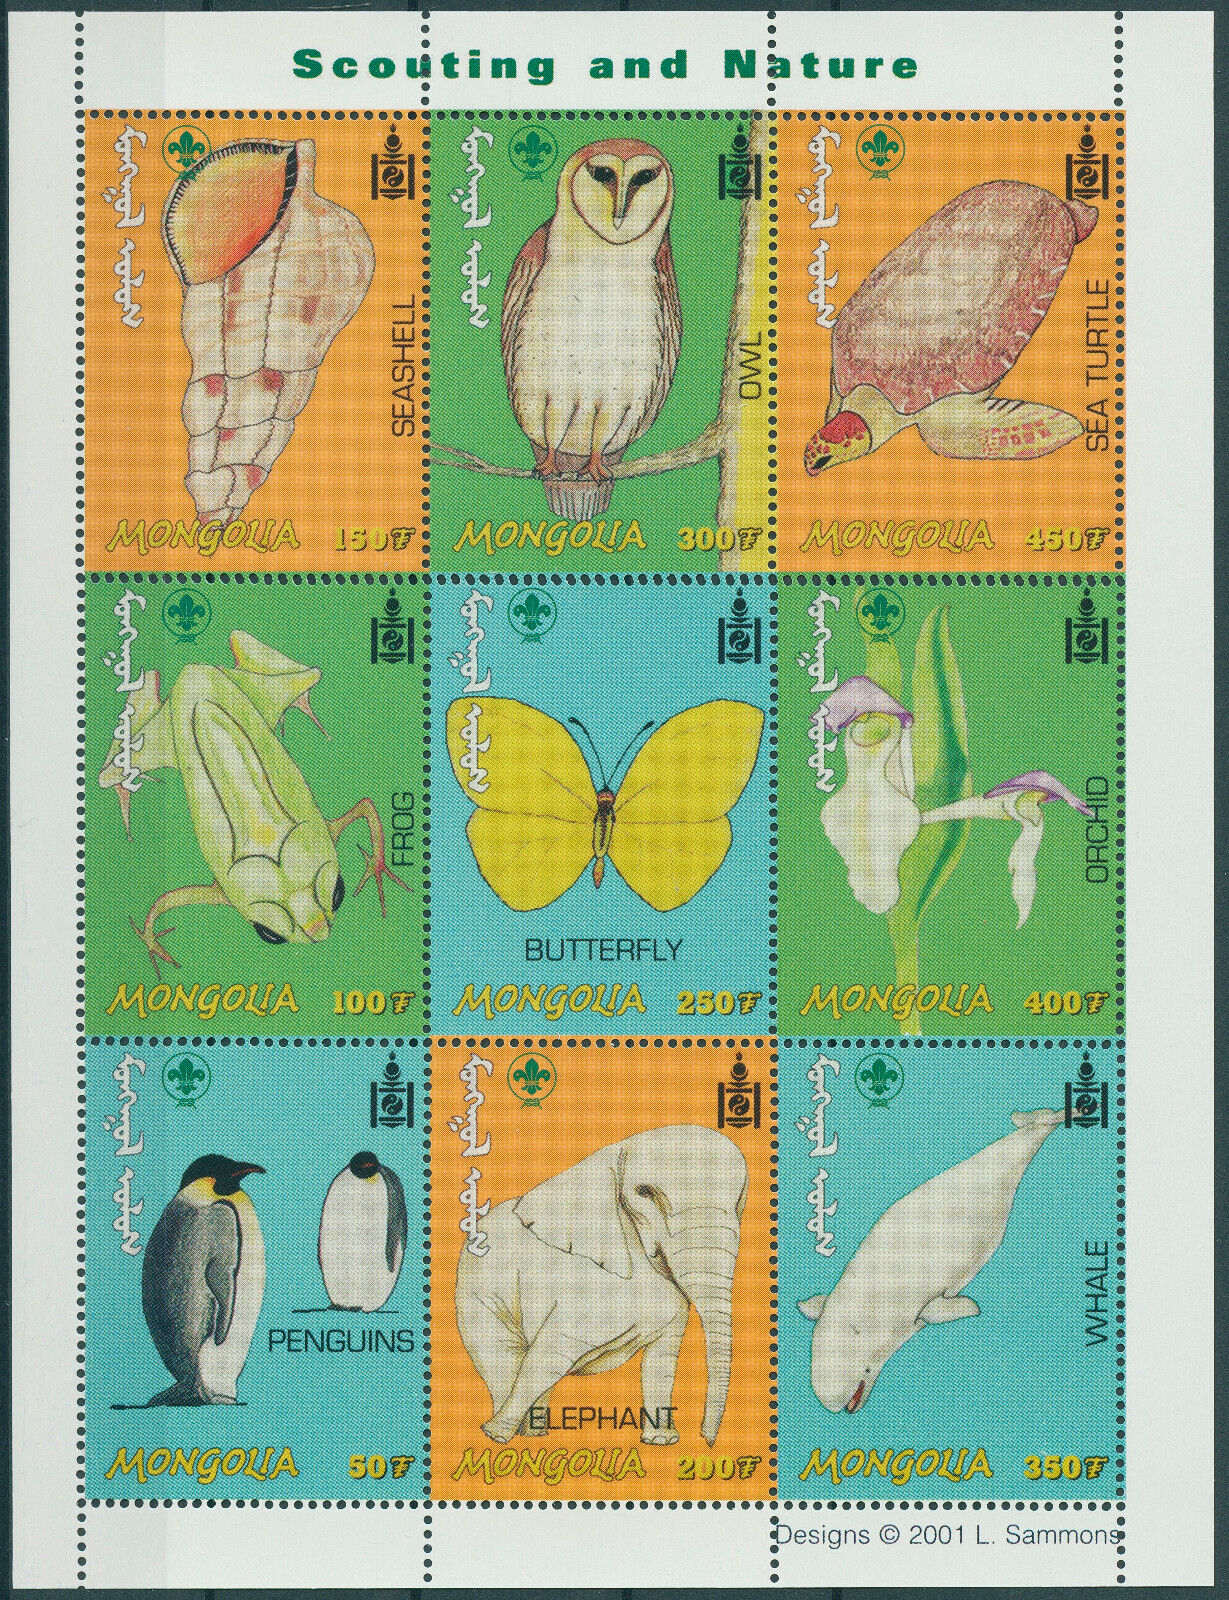 Mongolia 2001 MNH Scouting Stamps Nature Penguins Elephants Owls Butterfly 9v MS